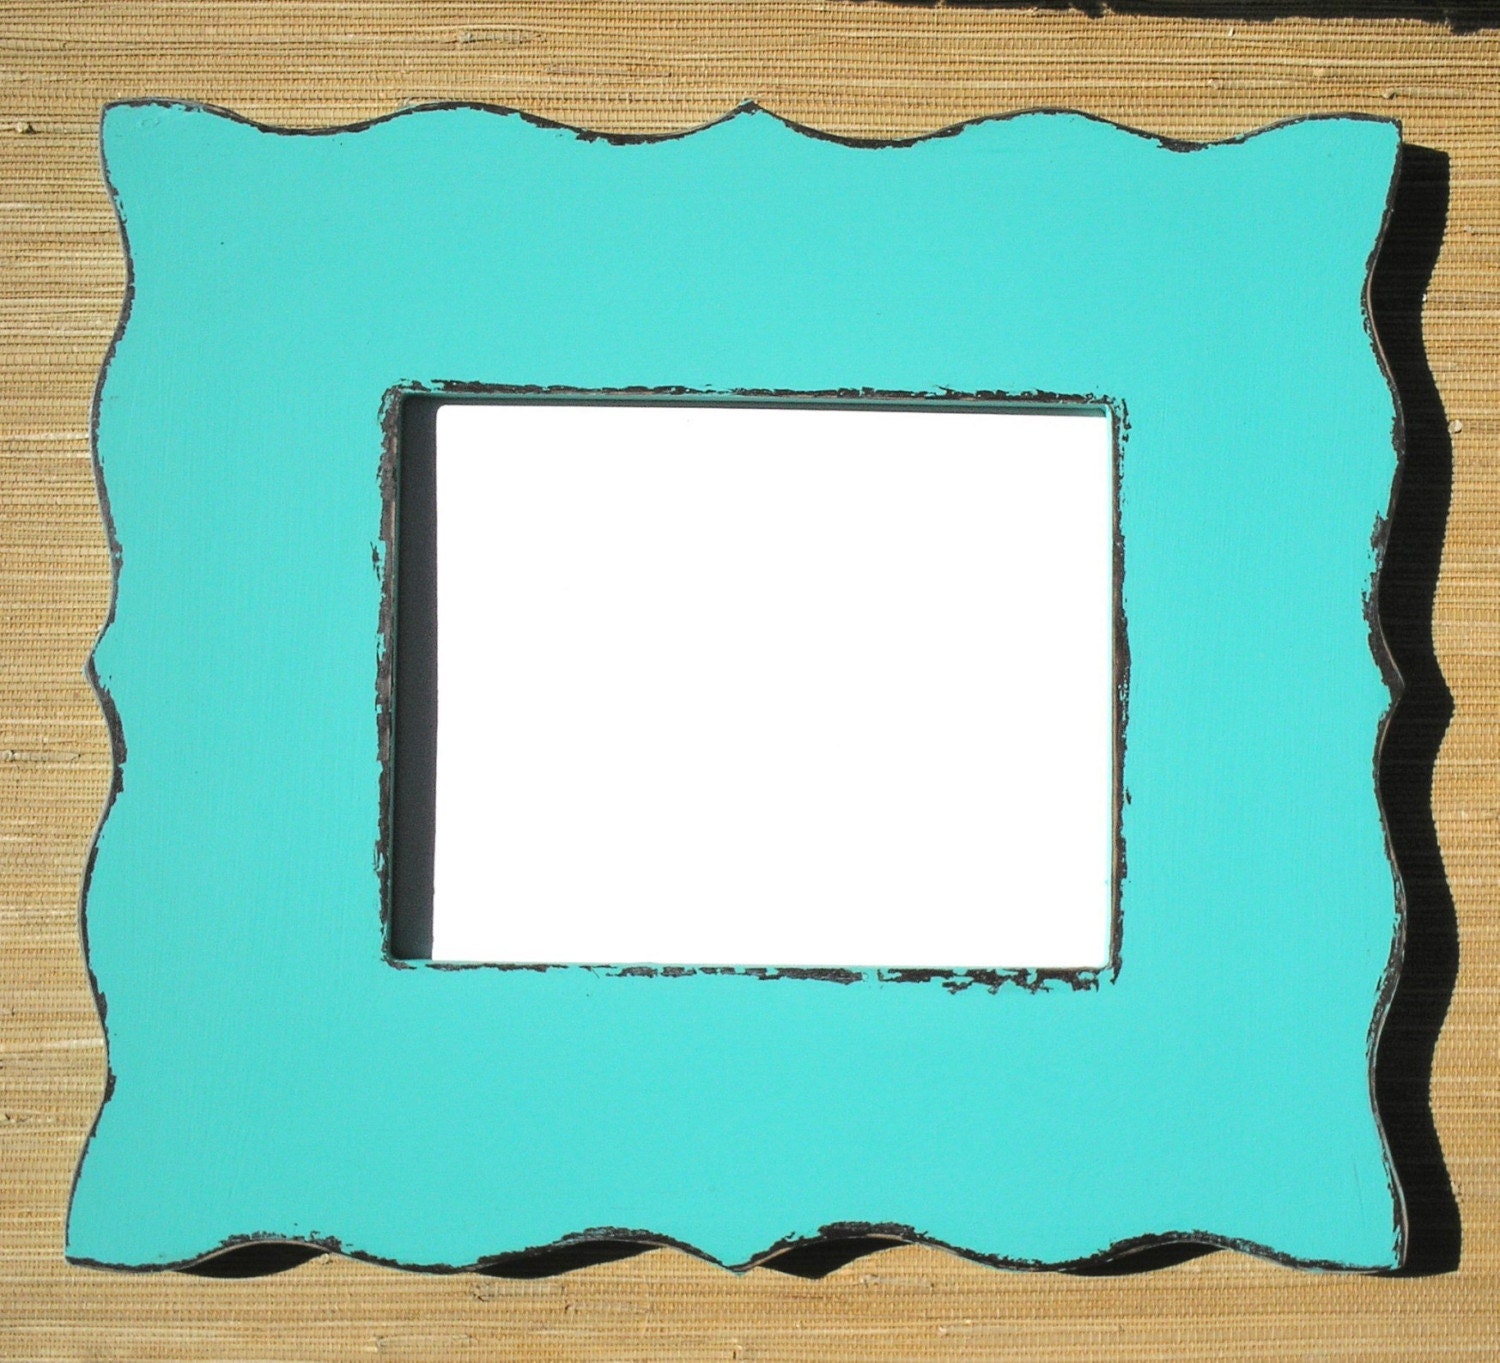 Whimsical Chipped Shabby Wide Picture Frame 8x8 OR 8x10 OR 8.5x11 with scrolled edge (Choose Color) Available in ANY size